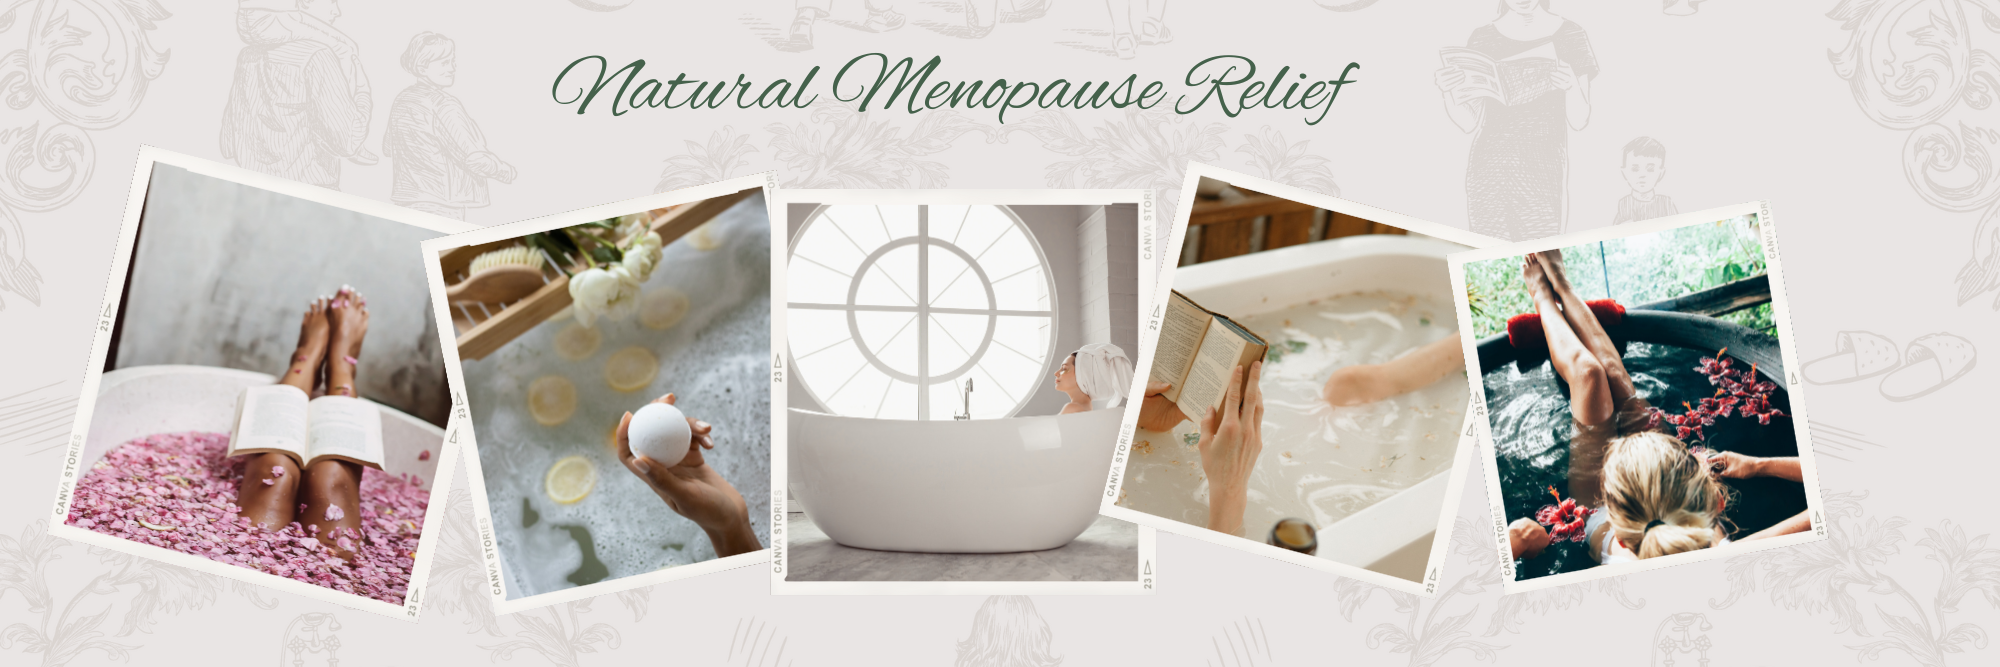 Navigating Menopause Naturally: CBD Bath Bombs Offer Relief